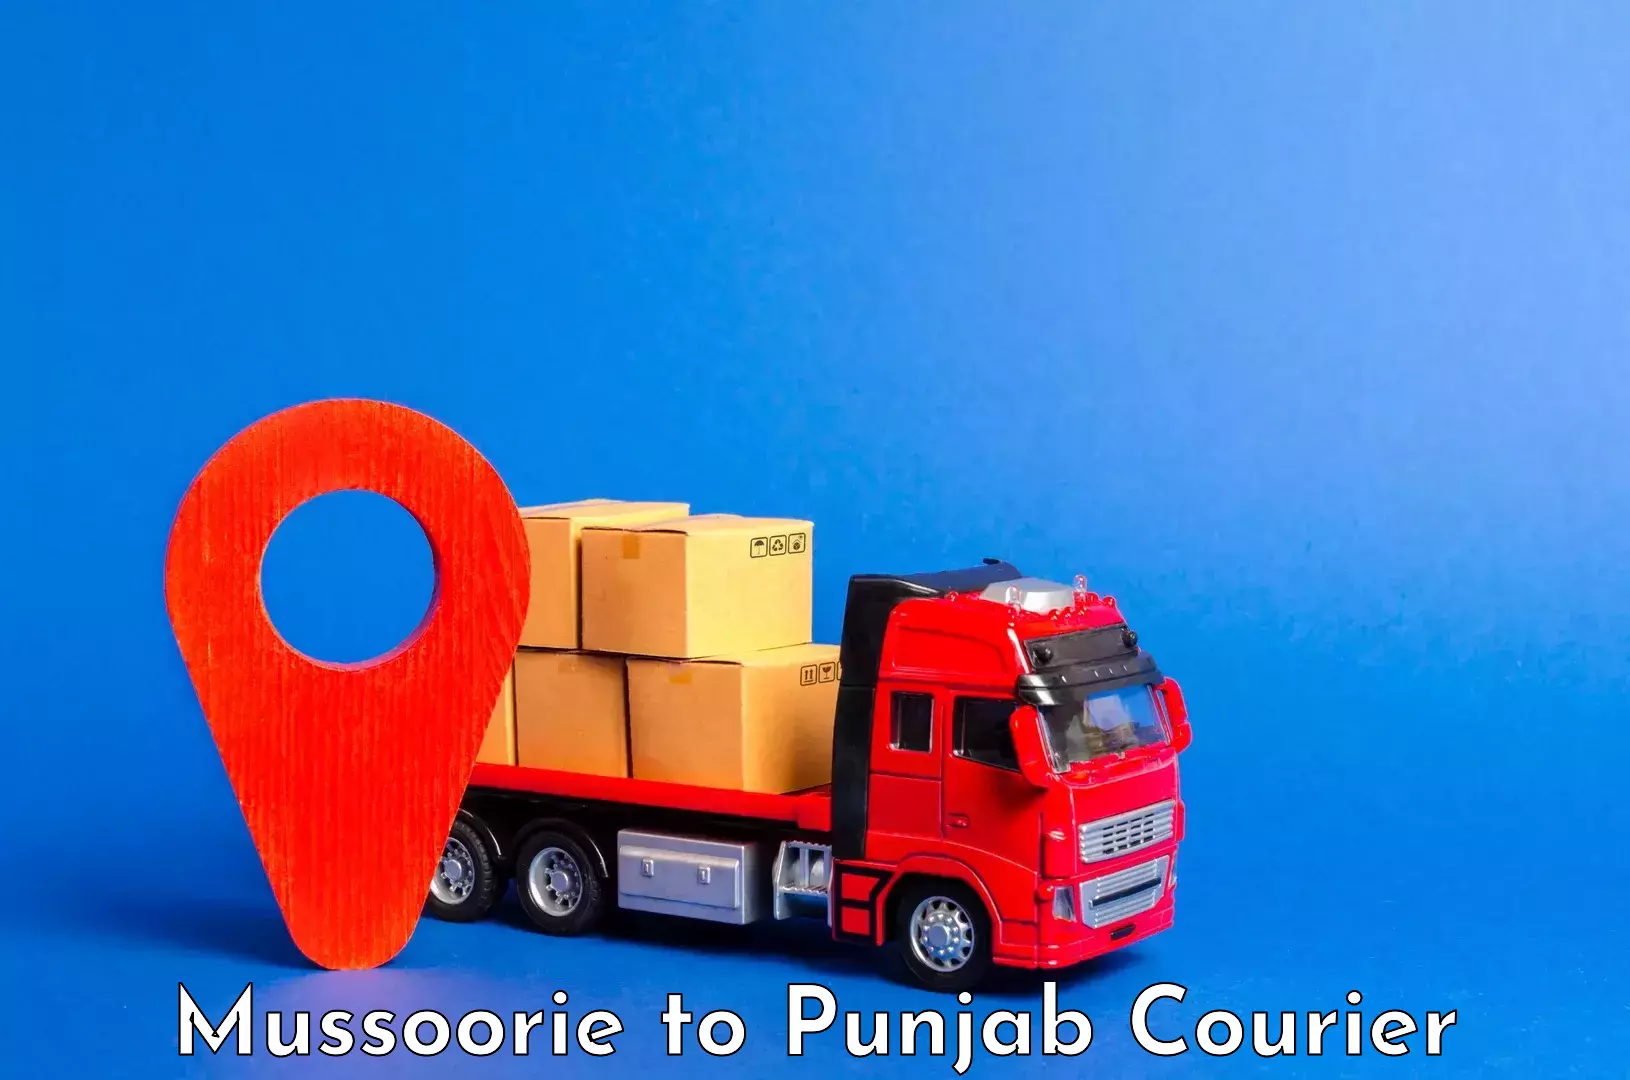 Luggage transport consultancy Mussoorie to Patiala